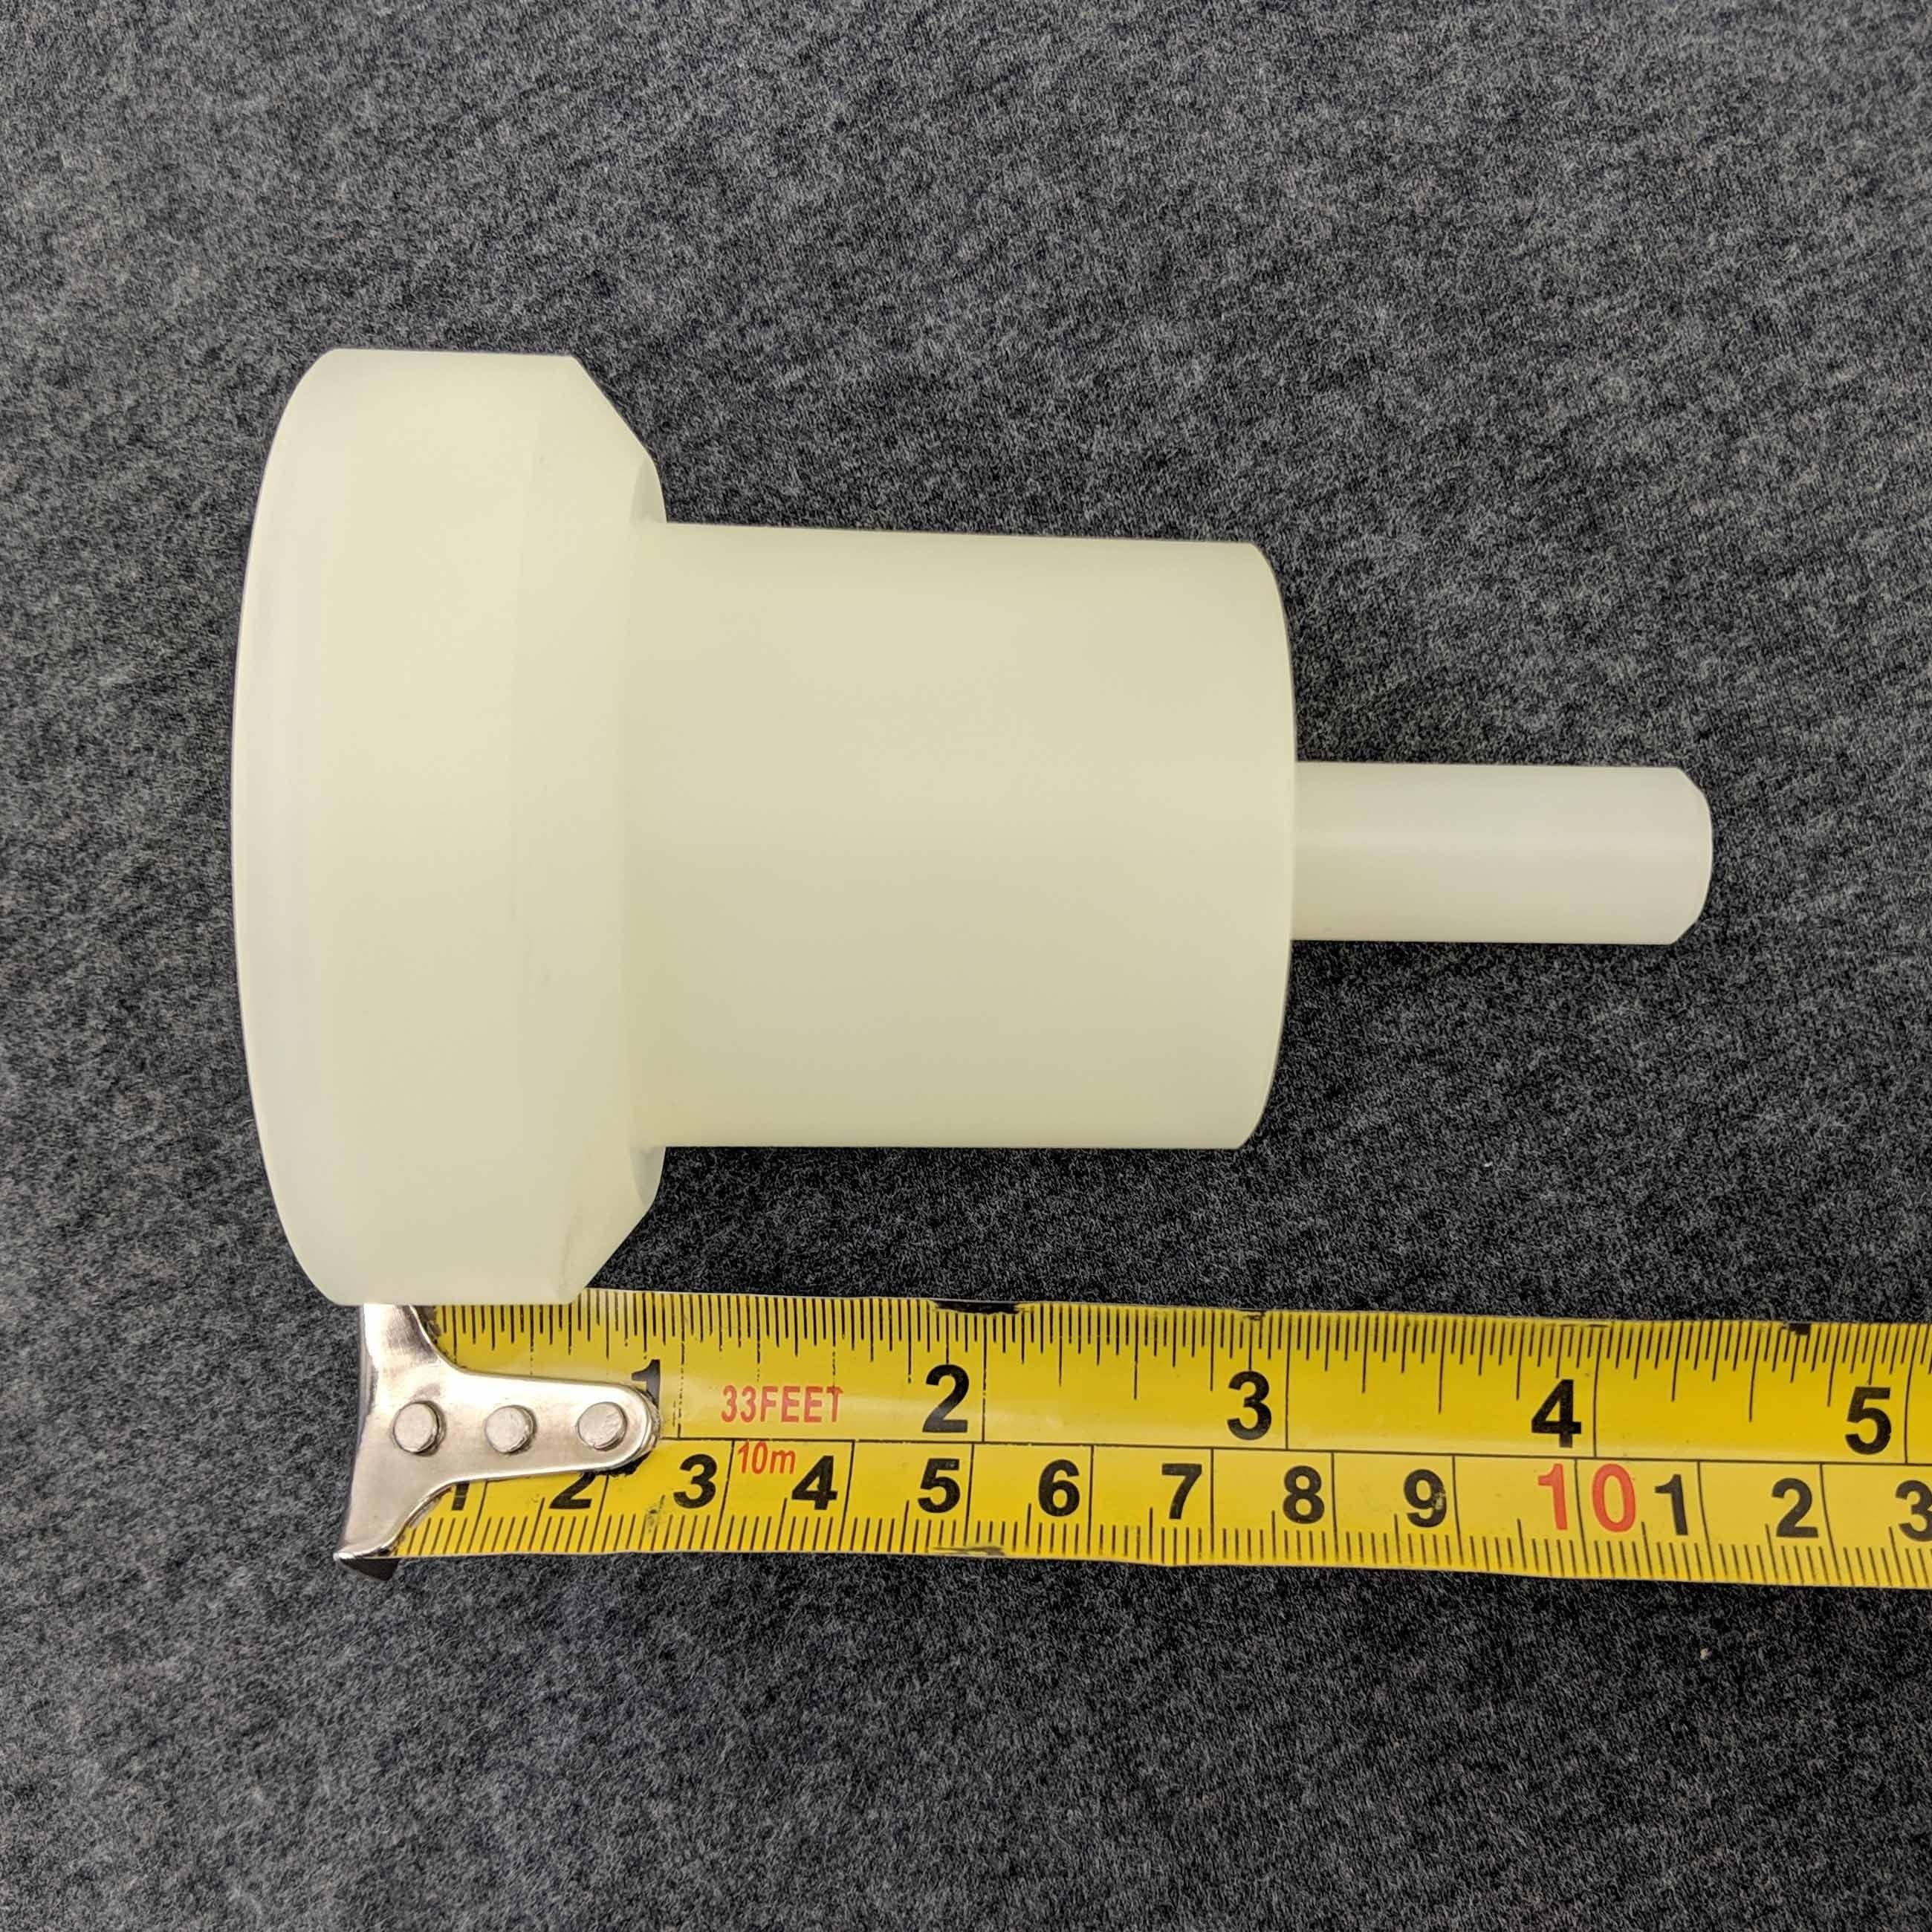 Cannular Table Spacer - Used for 330ml Cans - KegLand